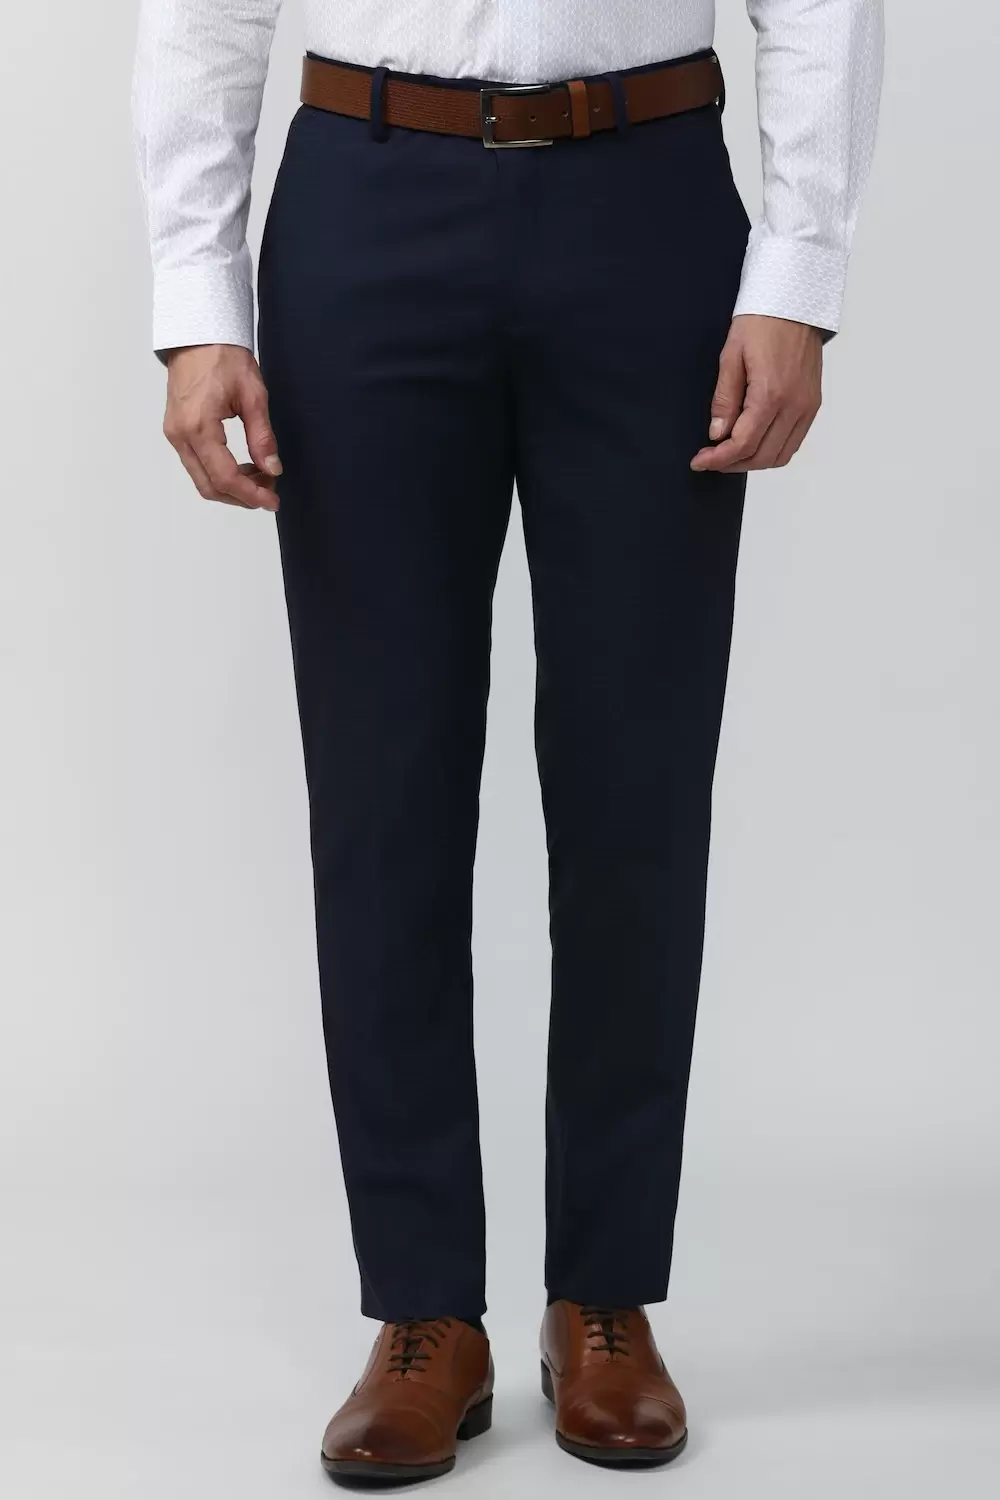 Peter England Men Navy Check Slim Fit Formal Trousers